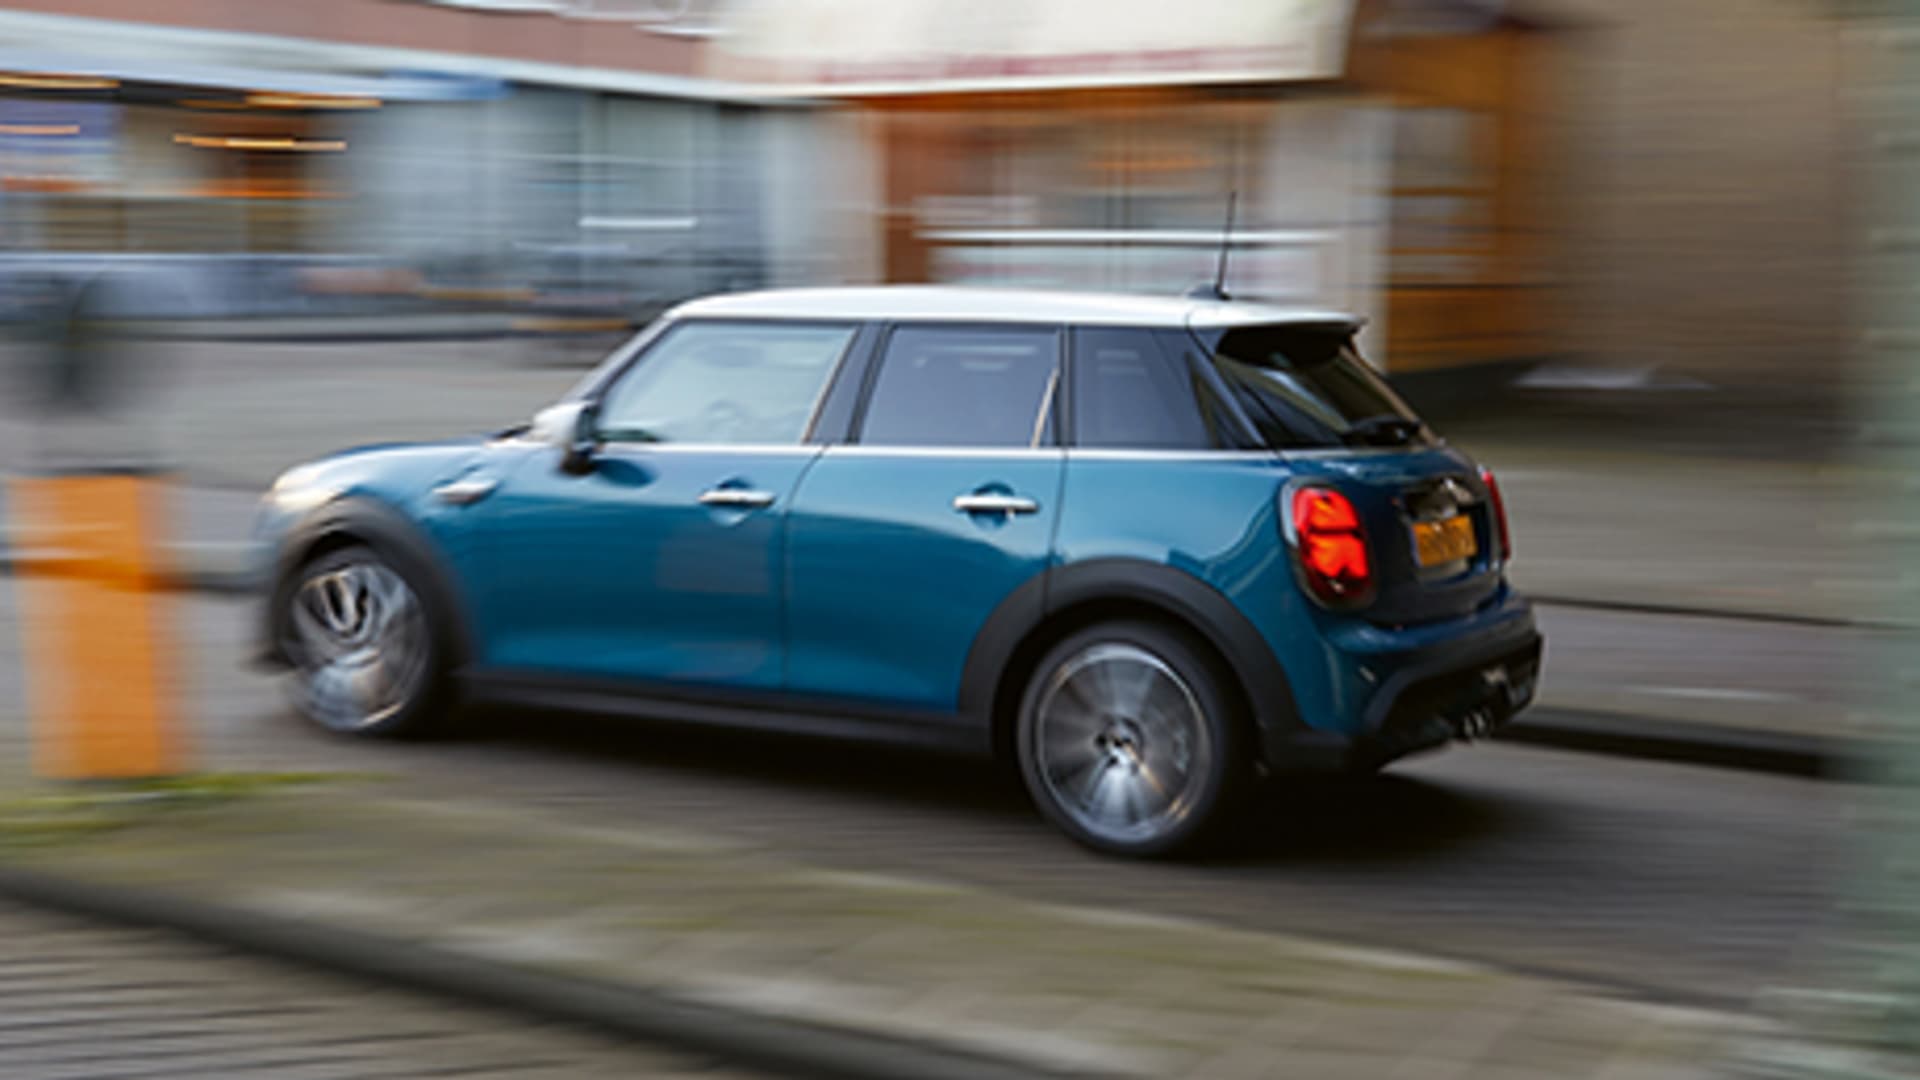 EVERYTHING YOU LOVE ABOUT MINI. AND MORE.